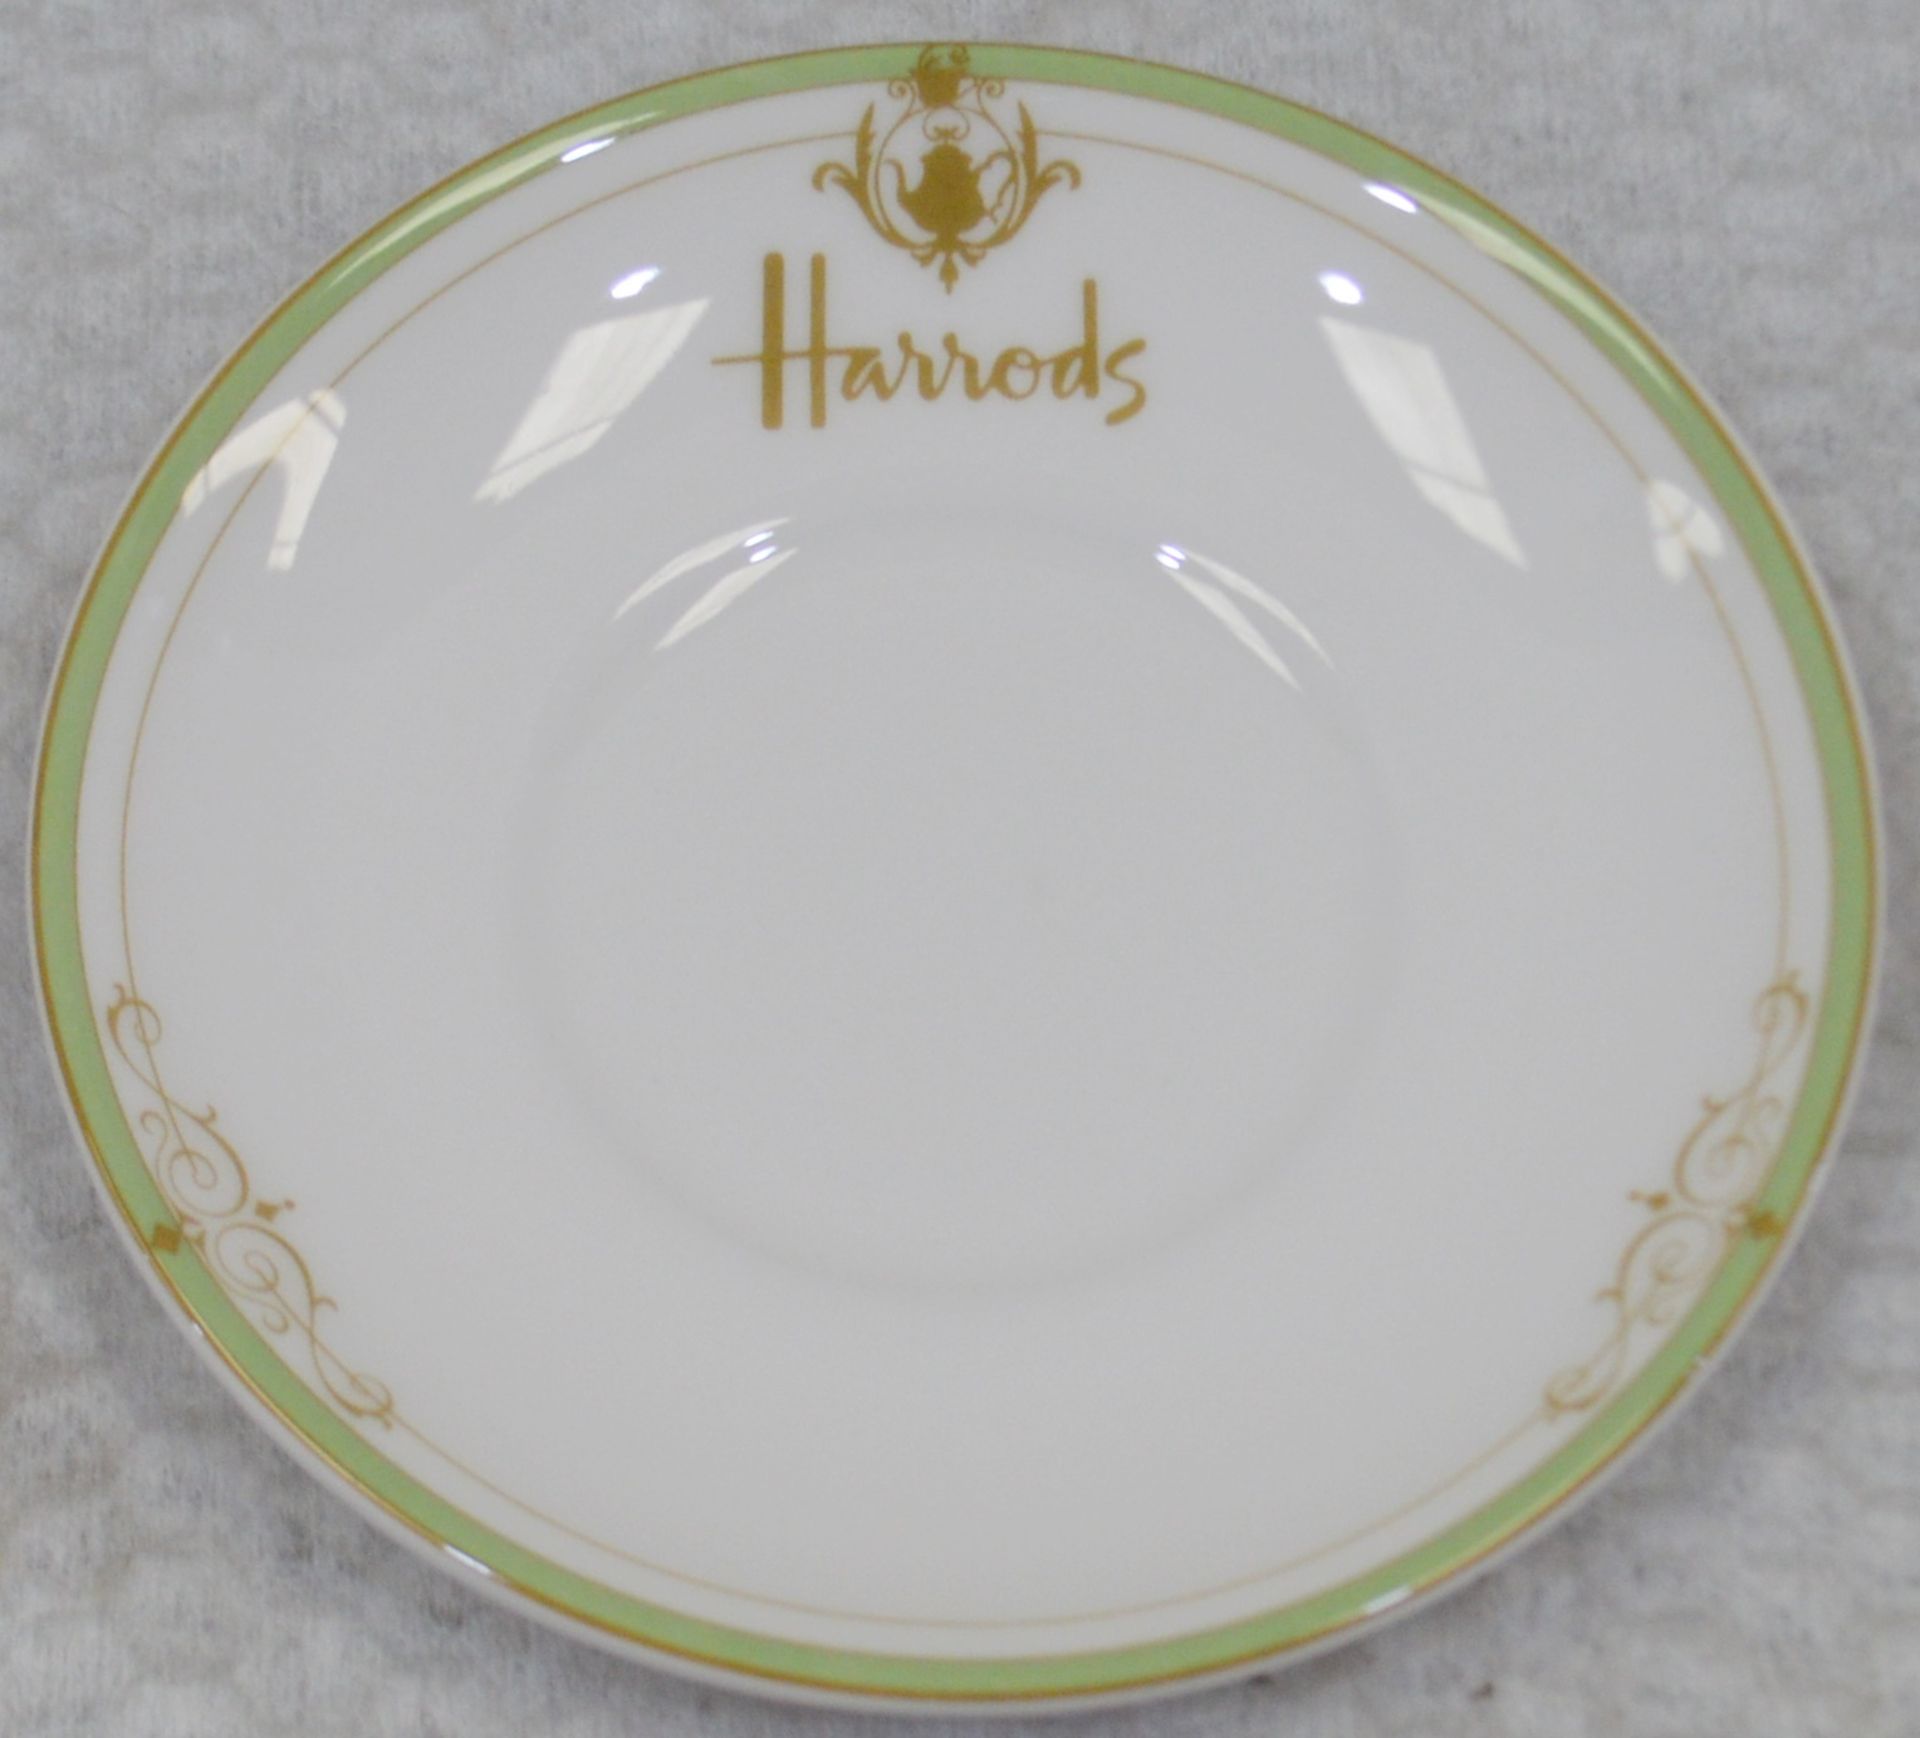 36 x Harrods Two Colour Litho Can Stands Plates - Dimensions: 6.5 inch slim - Recently Removed